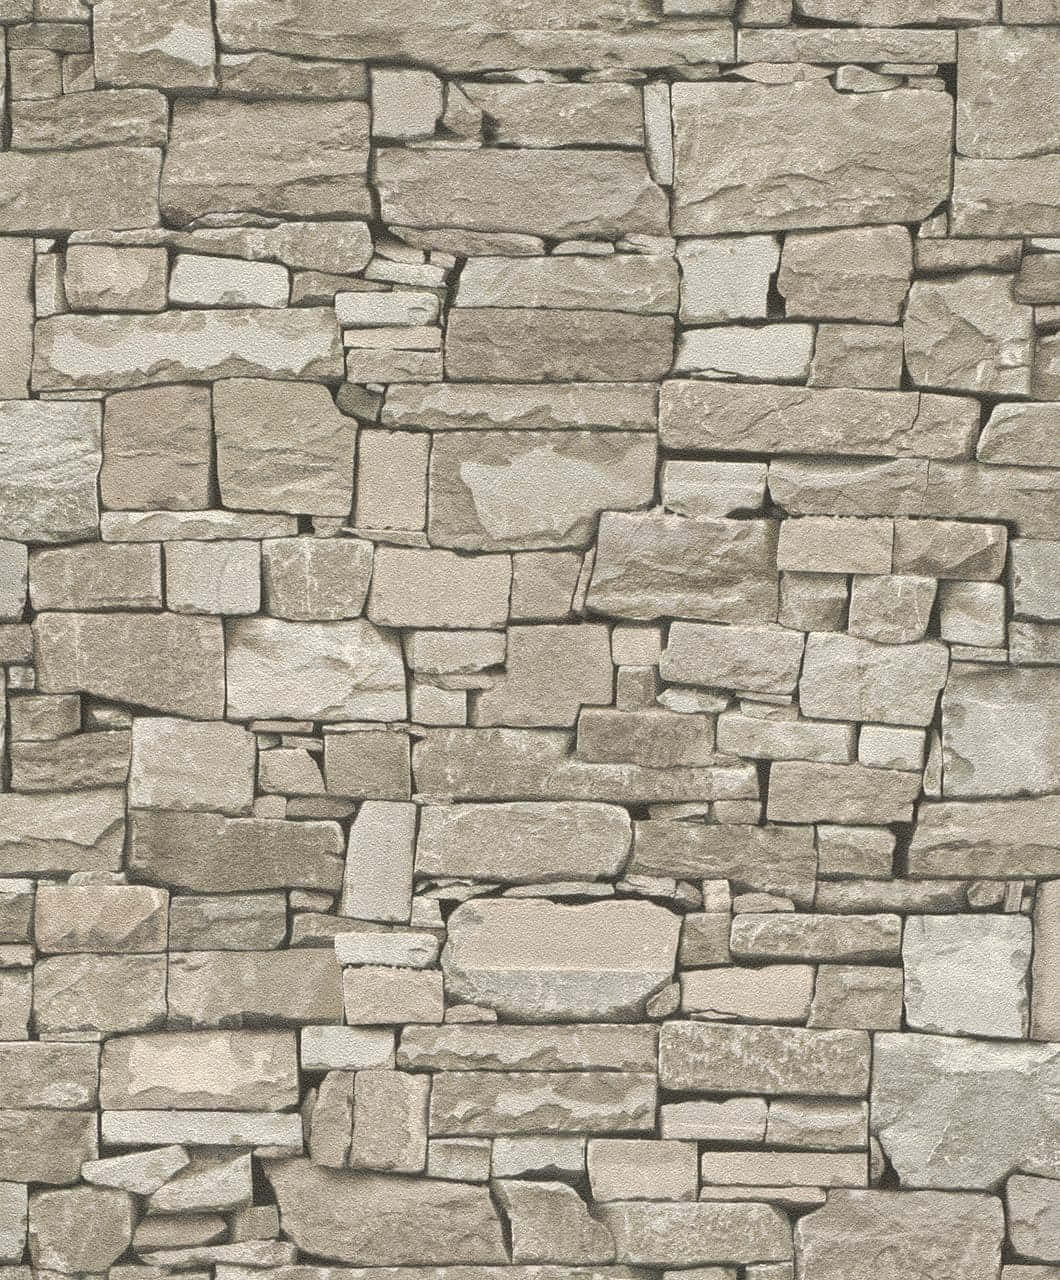 A Close Up Image Of A Stone Wall